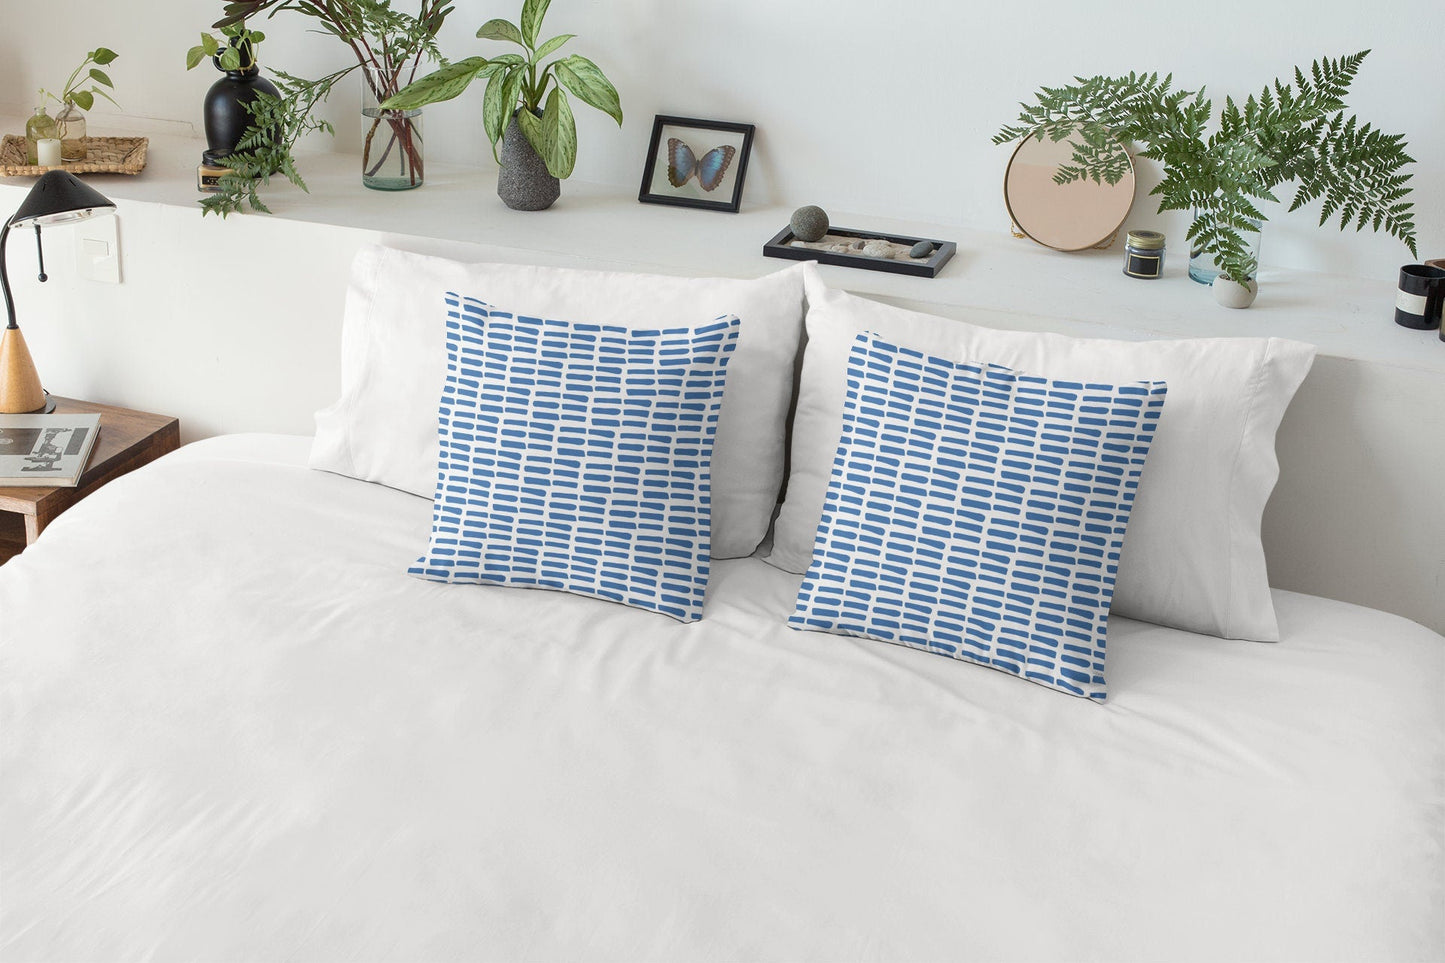 Blue and White Pillow